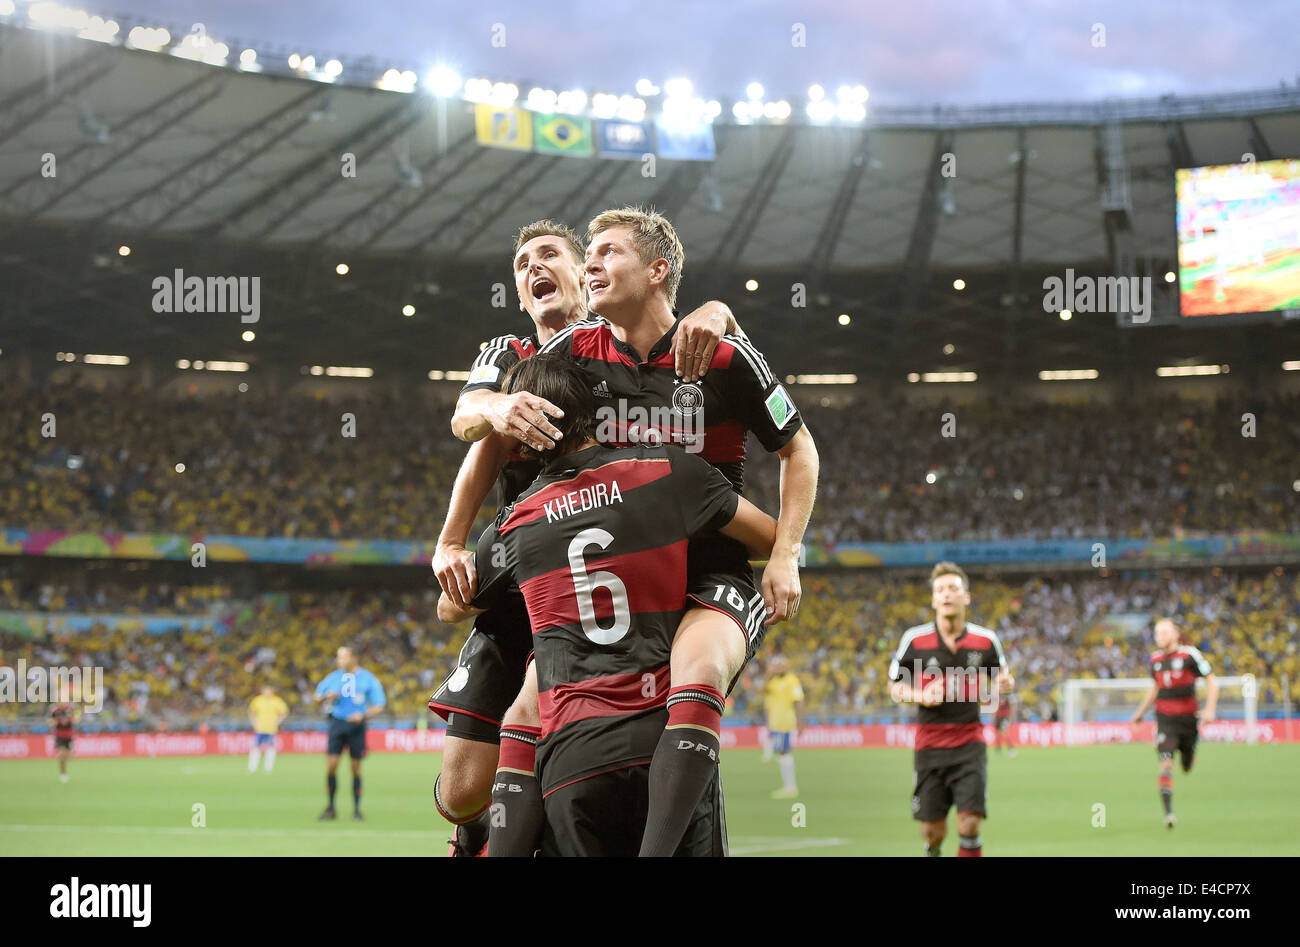 Belo Horizonte, Brazil. 08th July, 2014. Toni Kroos (R) of Germany celebrates with his teammate Miroslav Klose (L) and Sami Khedira after the scoring a goal during the FIFA World Cup 2014 semi-final soccer match between Brazil and Germany at Estadio Mineirao in Belo Horizonte, Brazil, 08 July 2014. Photo: Marcus Brandt/dpa/Alamy Live News Stock Photo